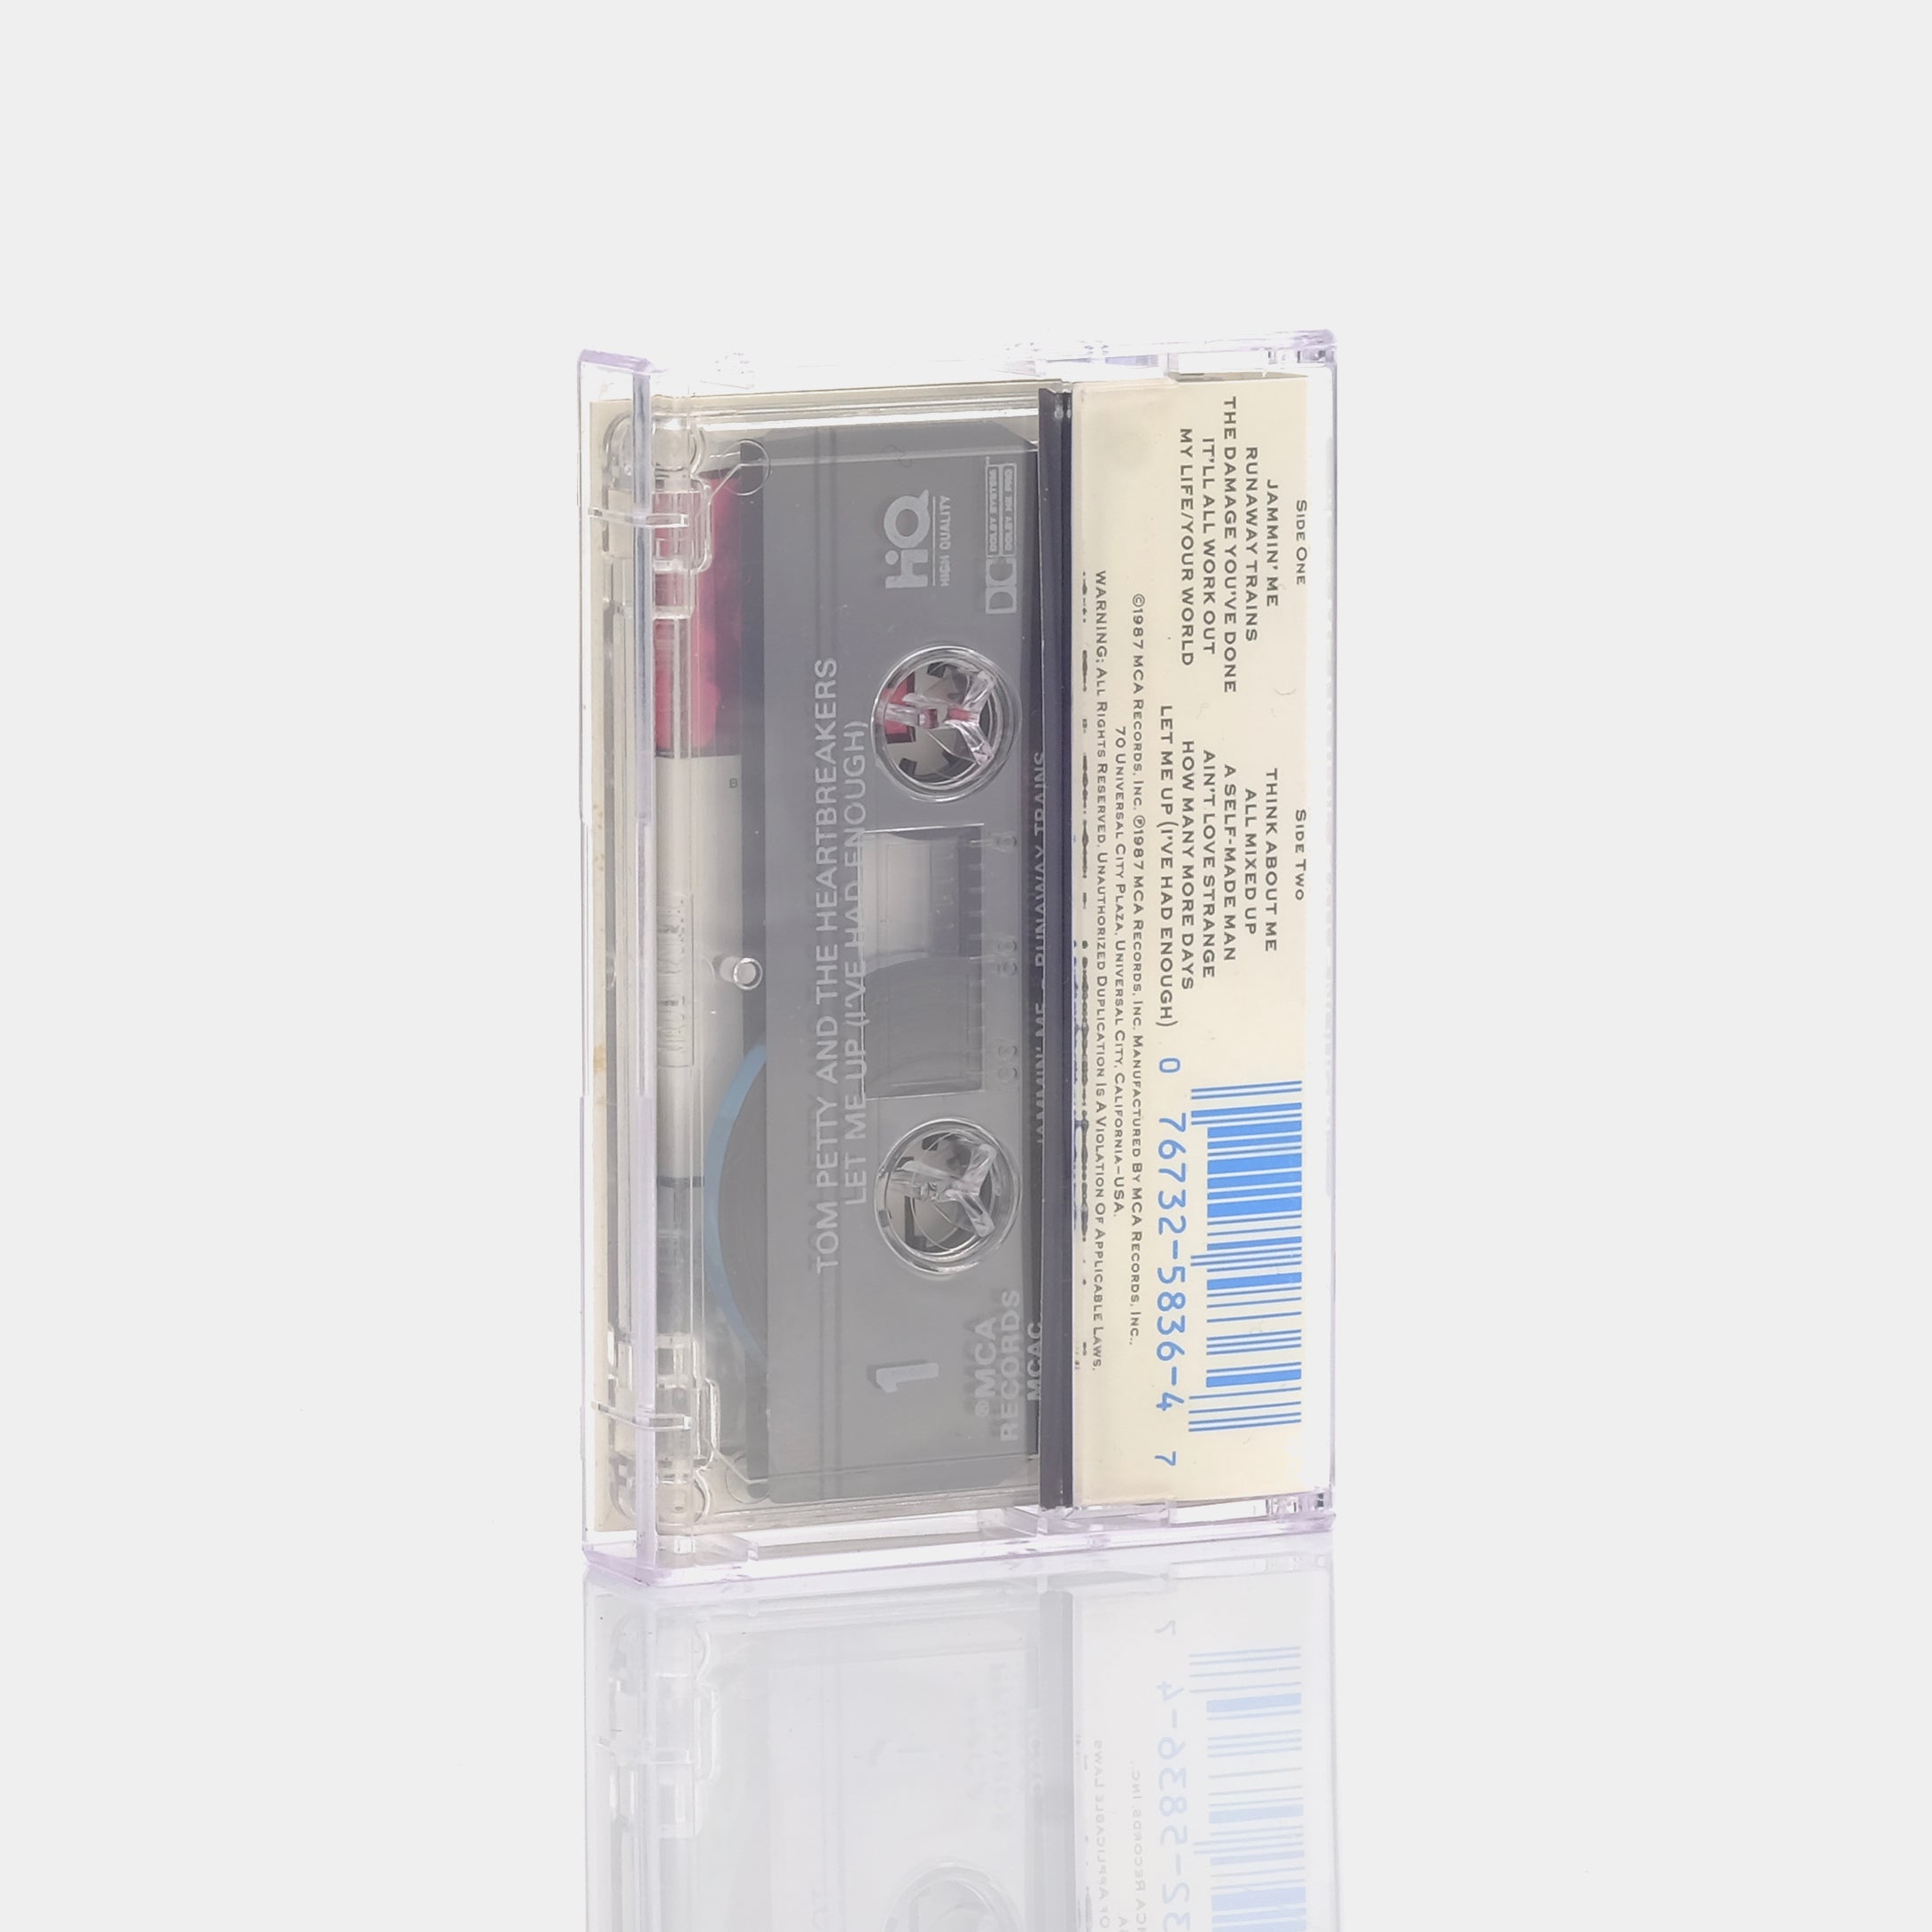 Tom Petty and the Heartbreakers - Let Me Up (I've Had Enough) Cassette Tape